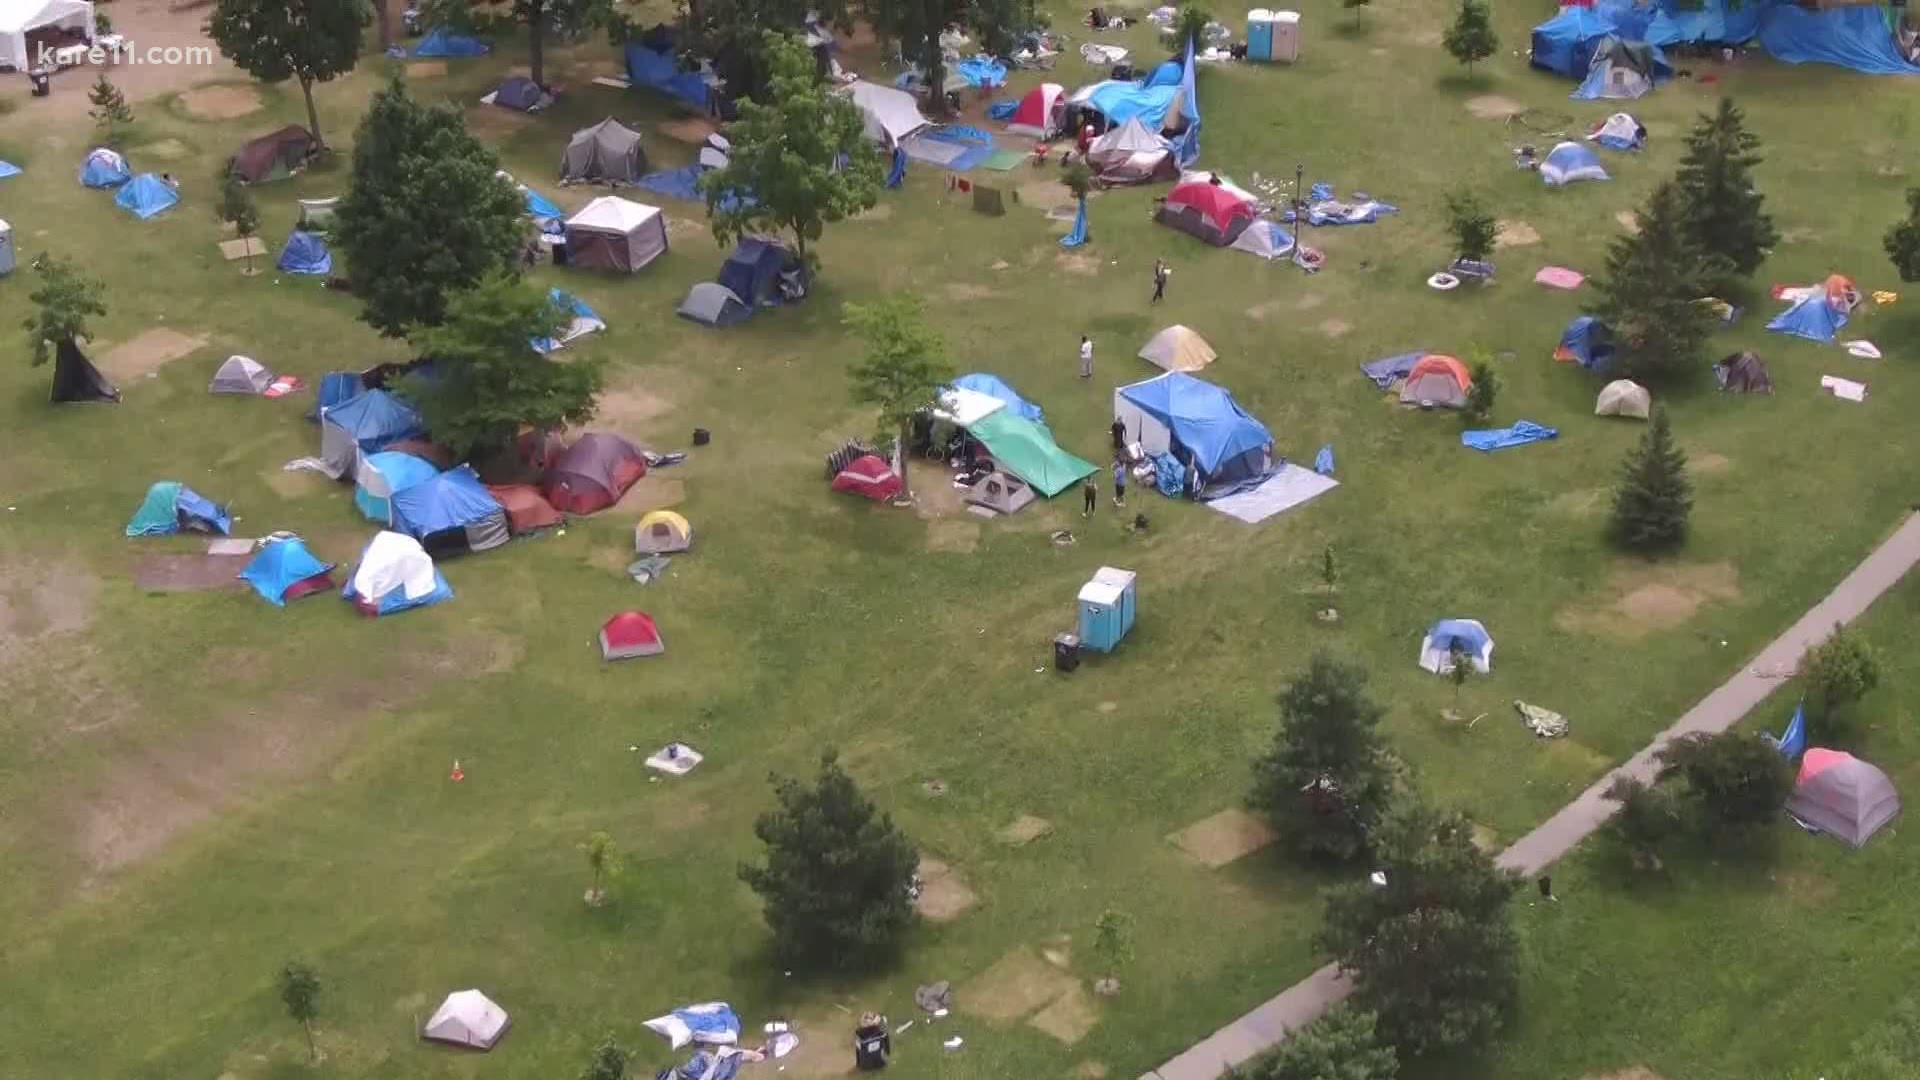 Minneapolis Park Board restricts size of homeless camps to 25 tents